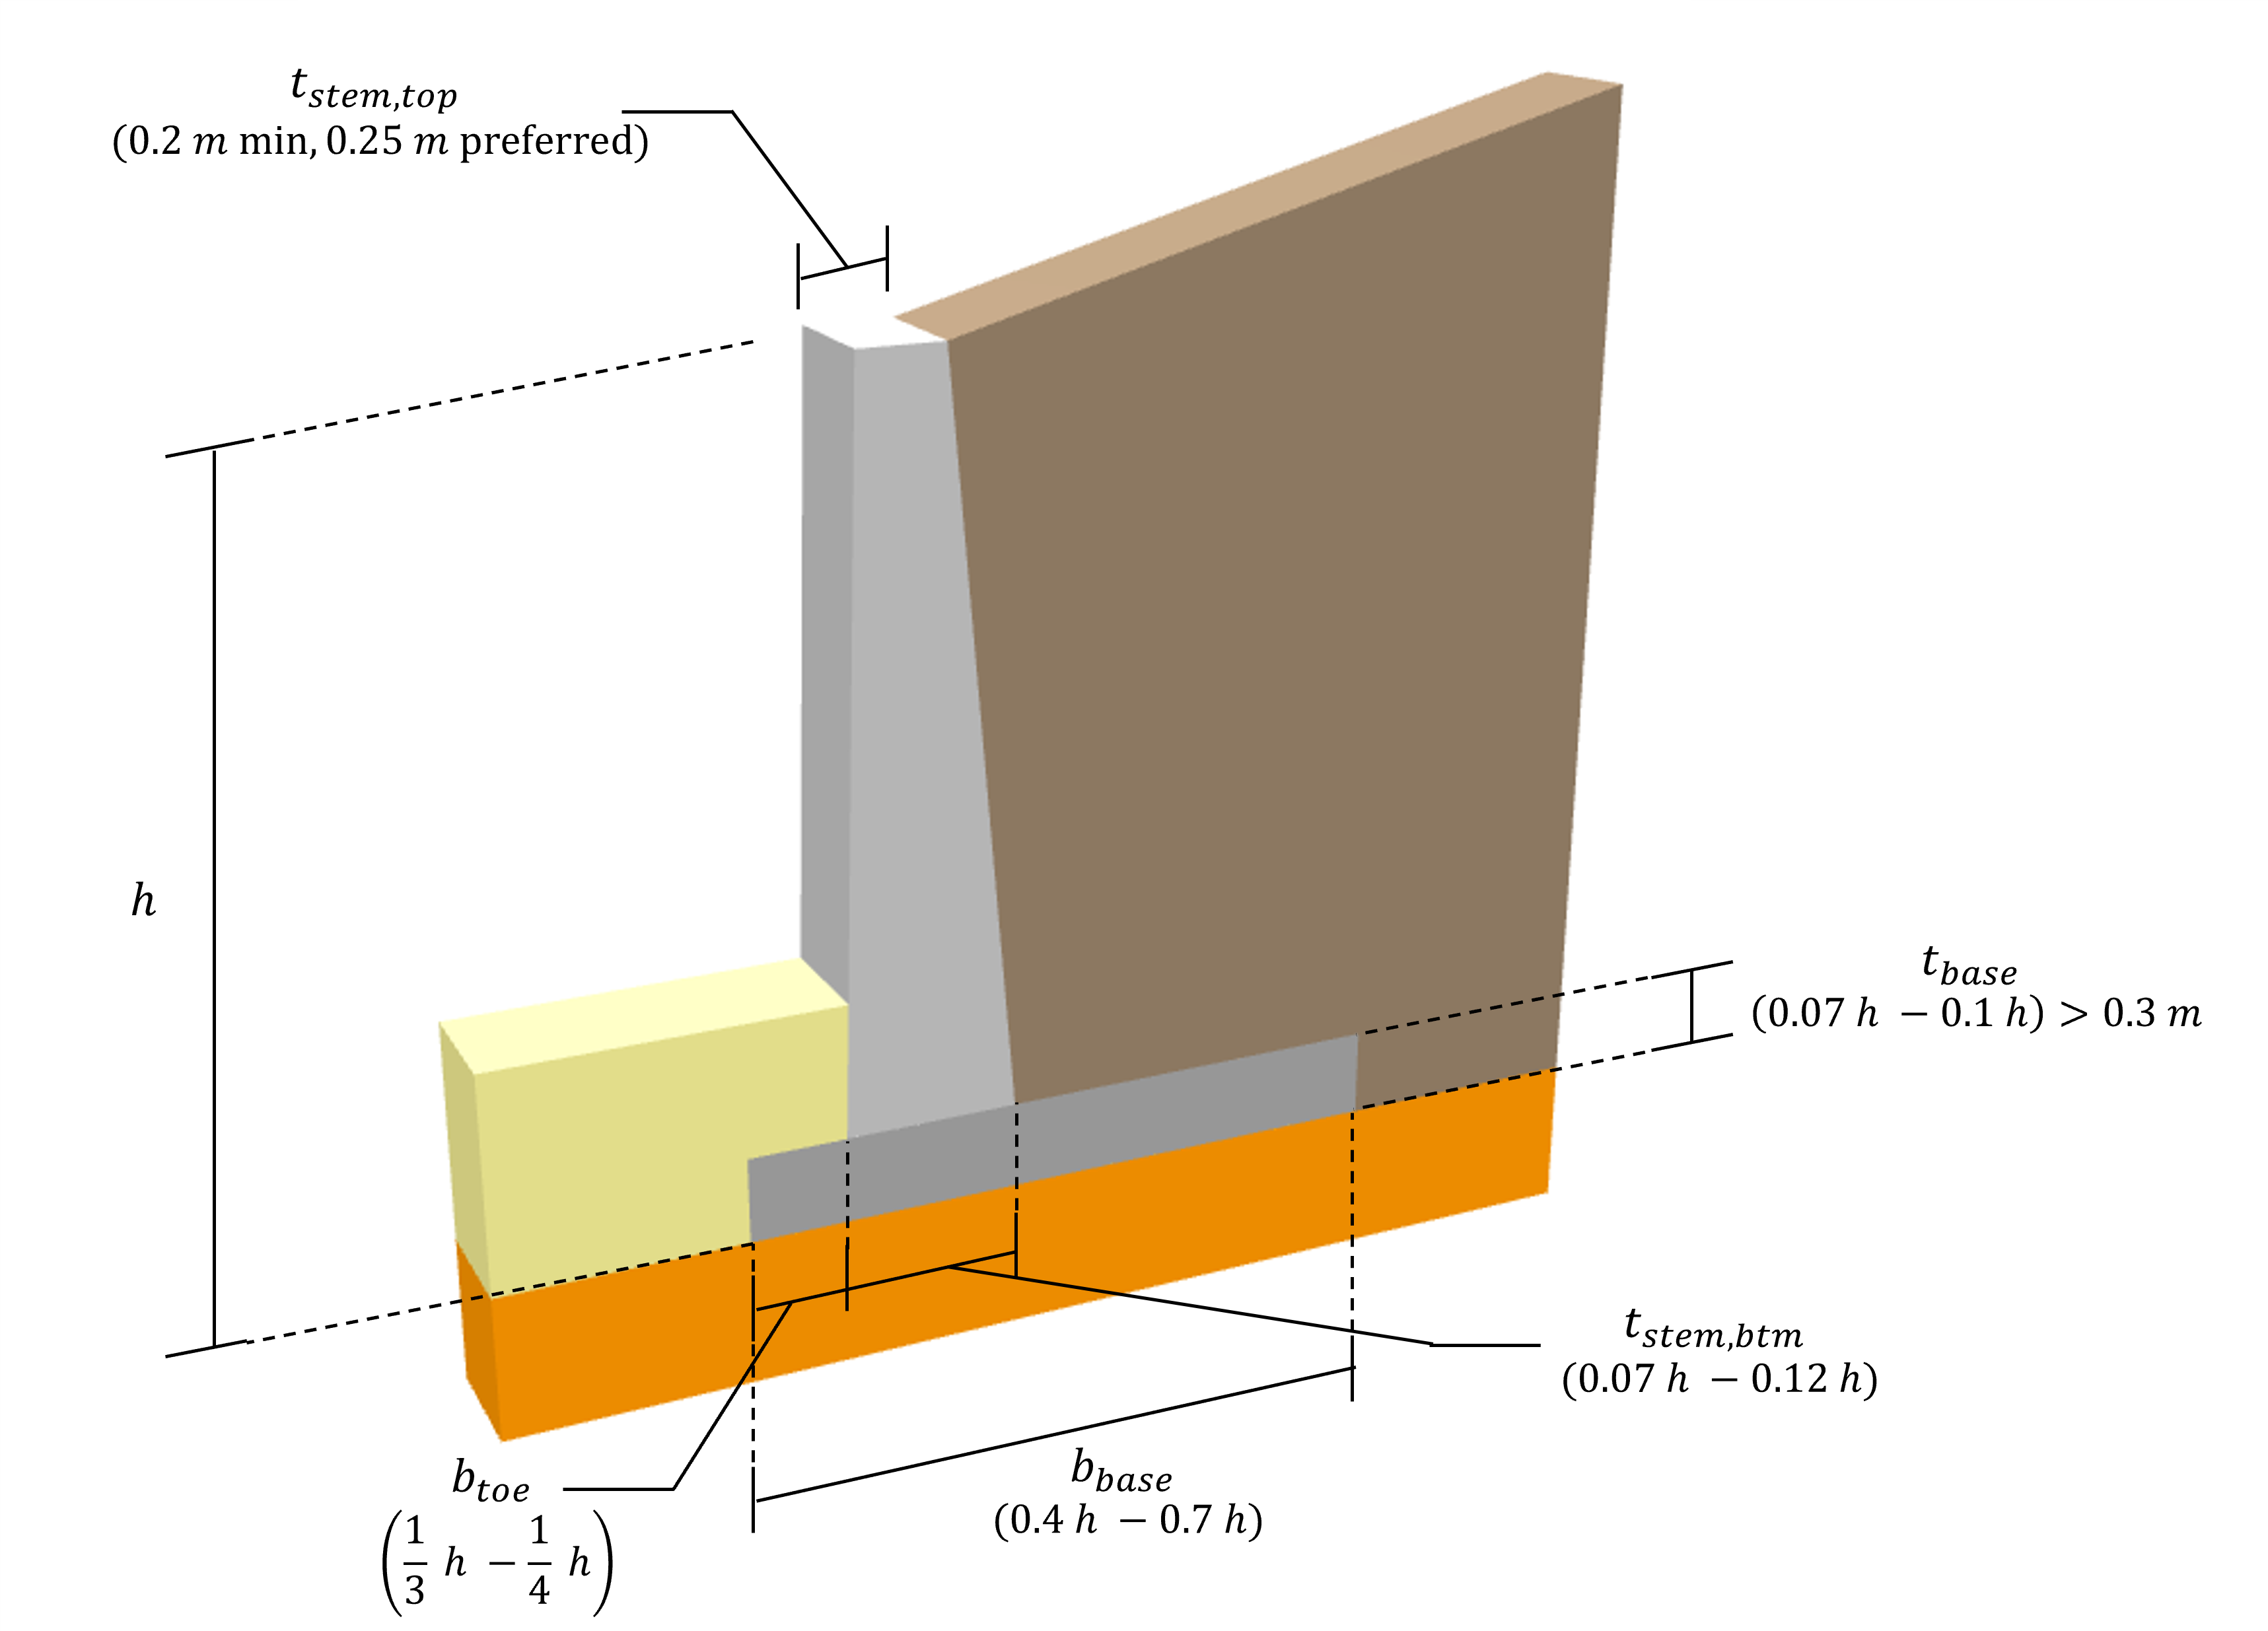 Skyciv Concrete Retaining Wall Design showing recommended ACI dimensions